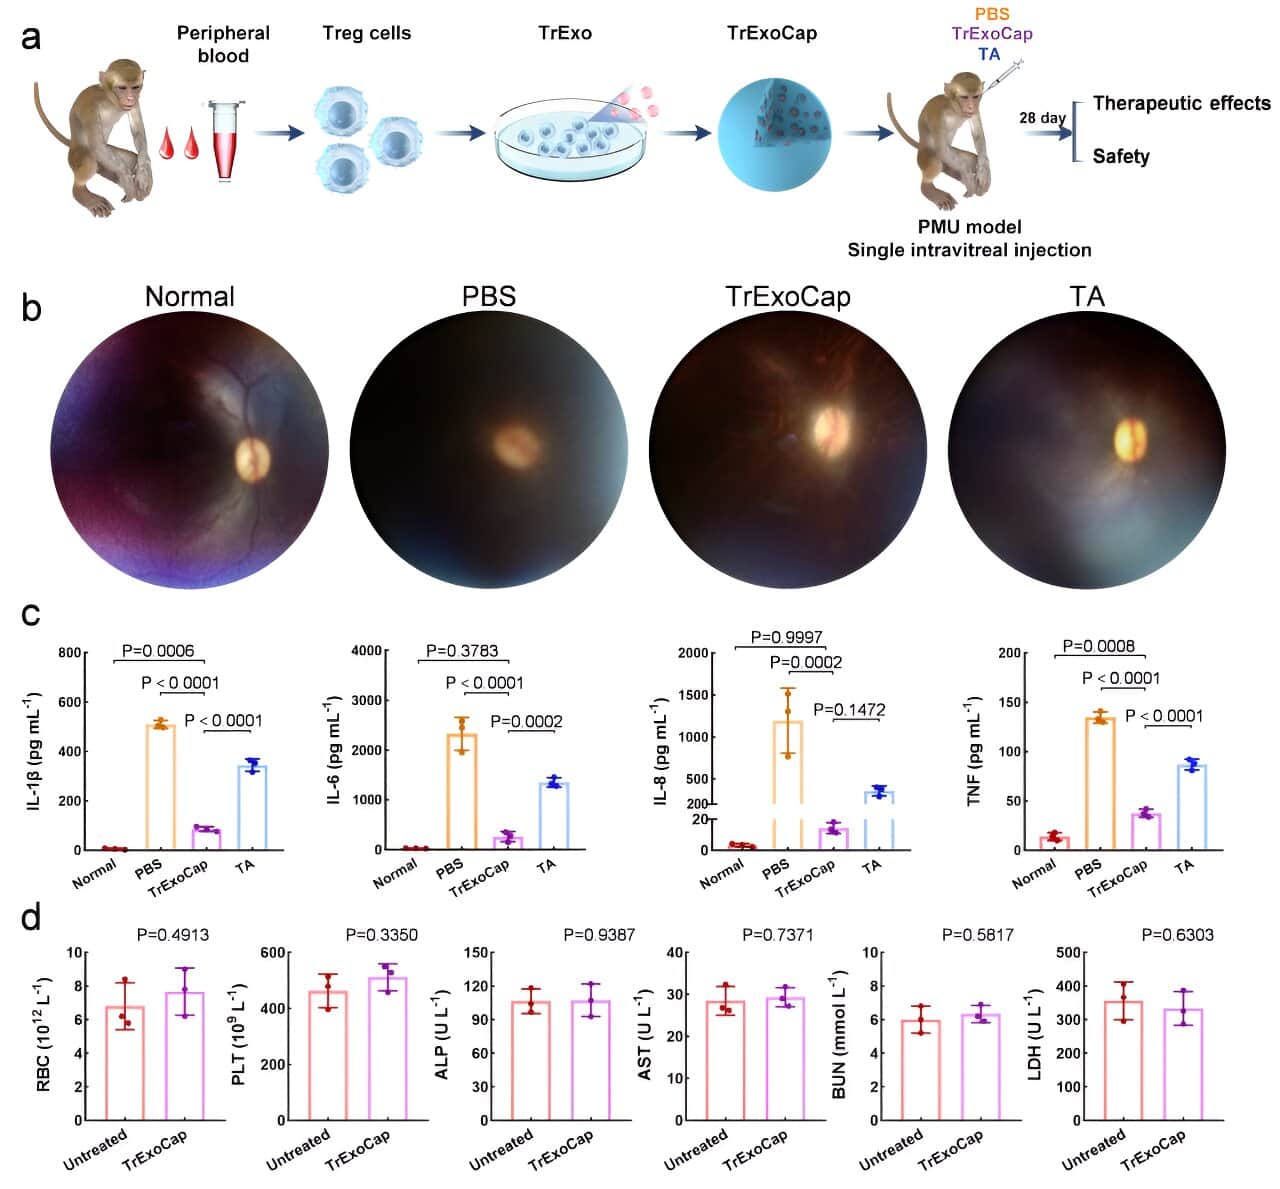 Therapeutic effects of TrExoCap in a PMU nonhuman primate model. Credit: Bao Han and Tian Ying